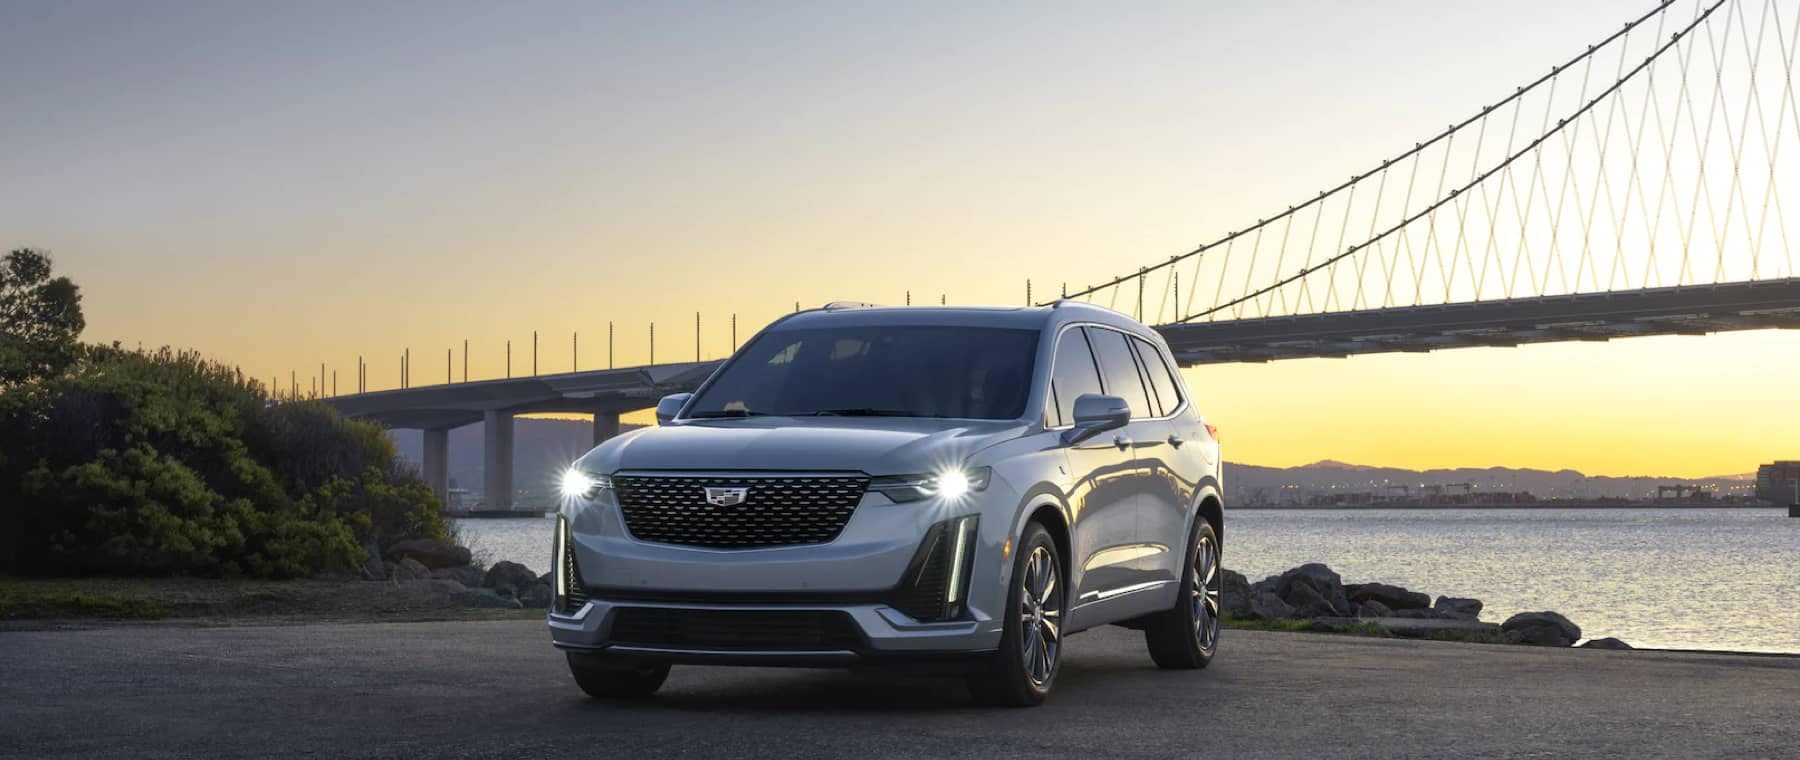 2021 Cadillac XT6 Parked at dusk with a bridge in the background